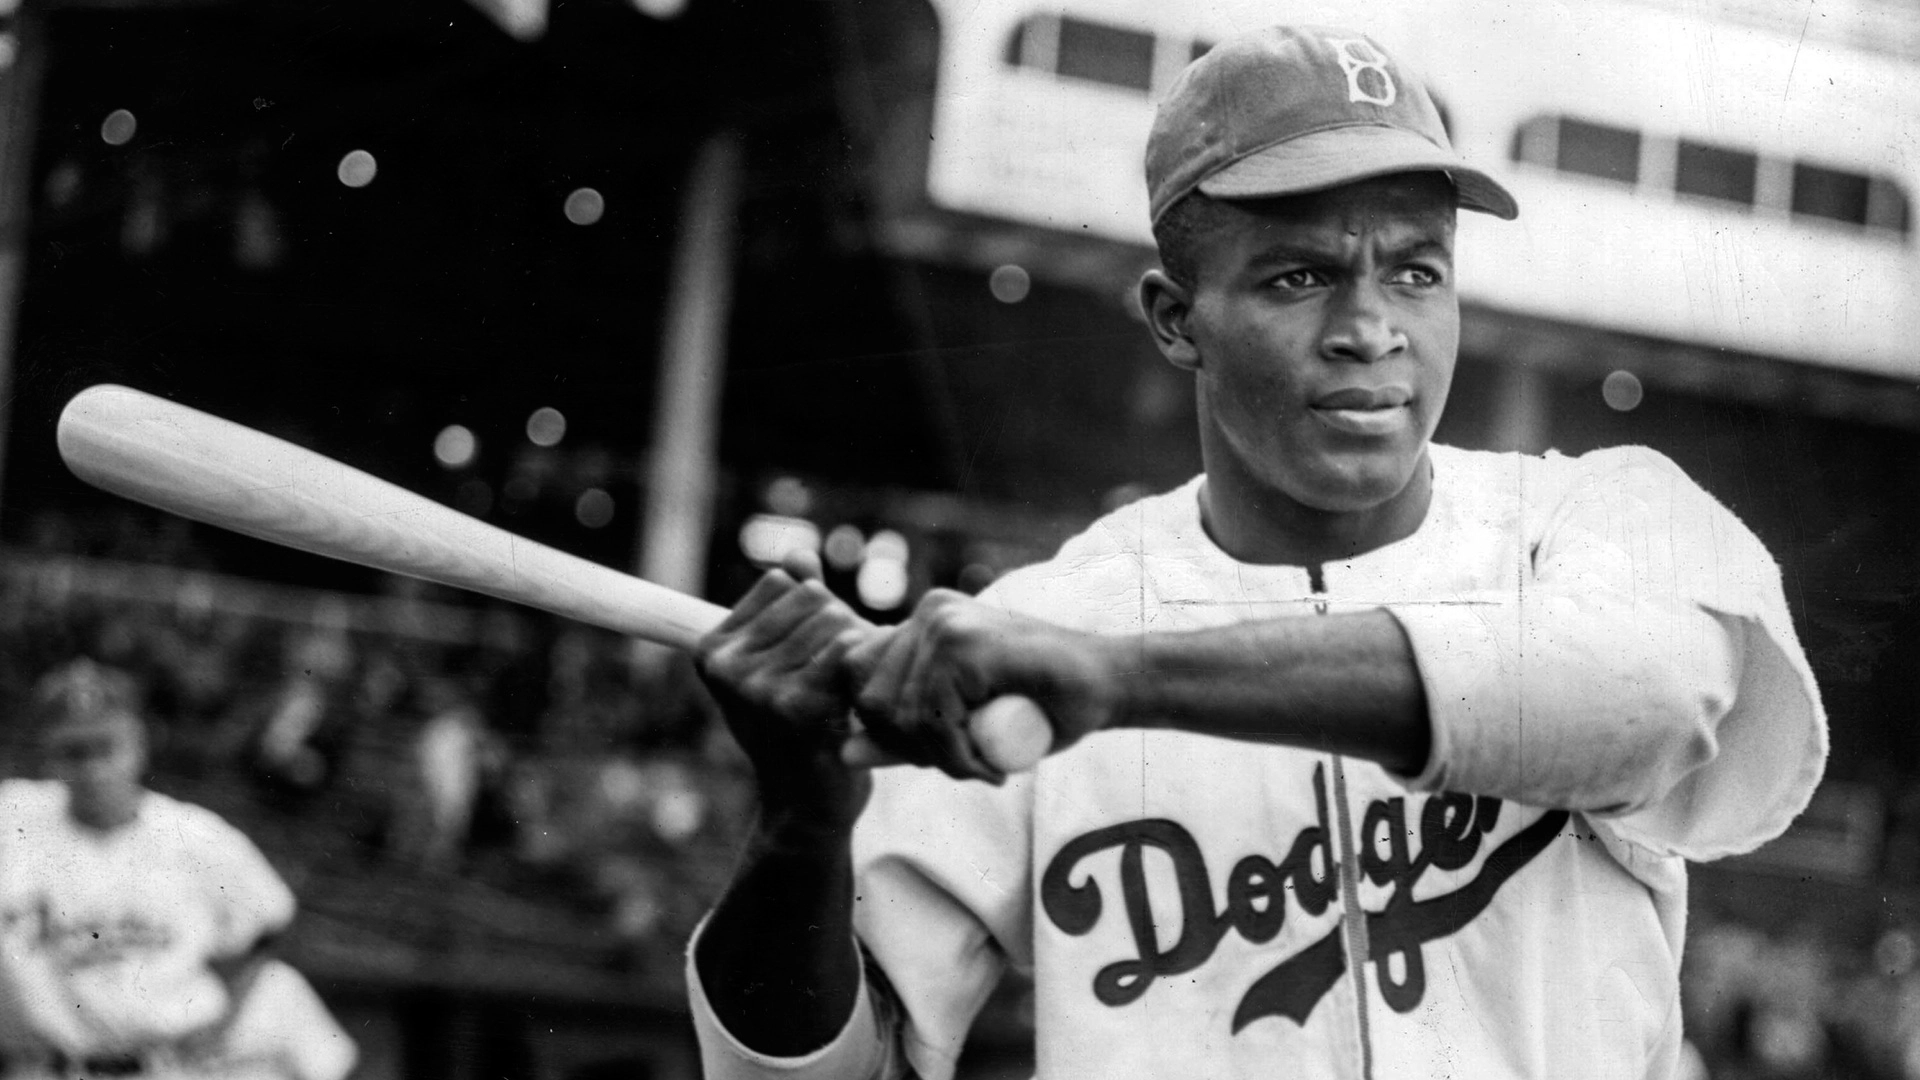 an essay about jackie robinson